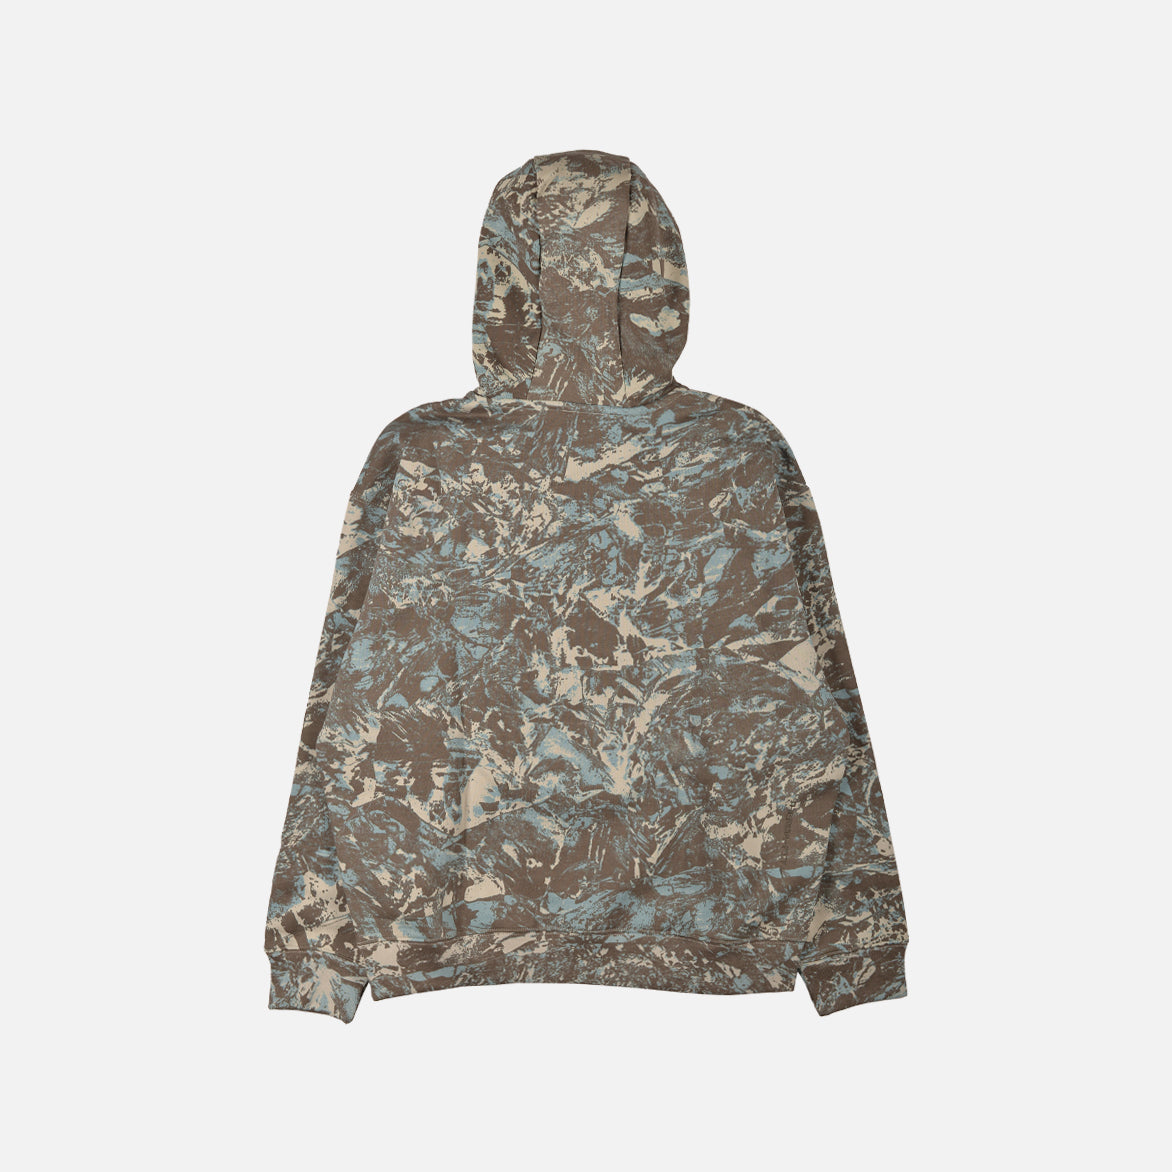 ACG THERMA-FIT ALLOVER PRINT HOODIE - LIGHT BONE / CAVE STONE / THUNDER BLUE